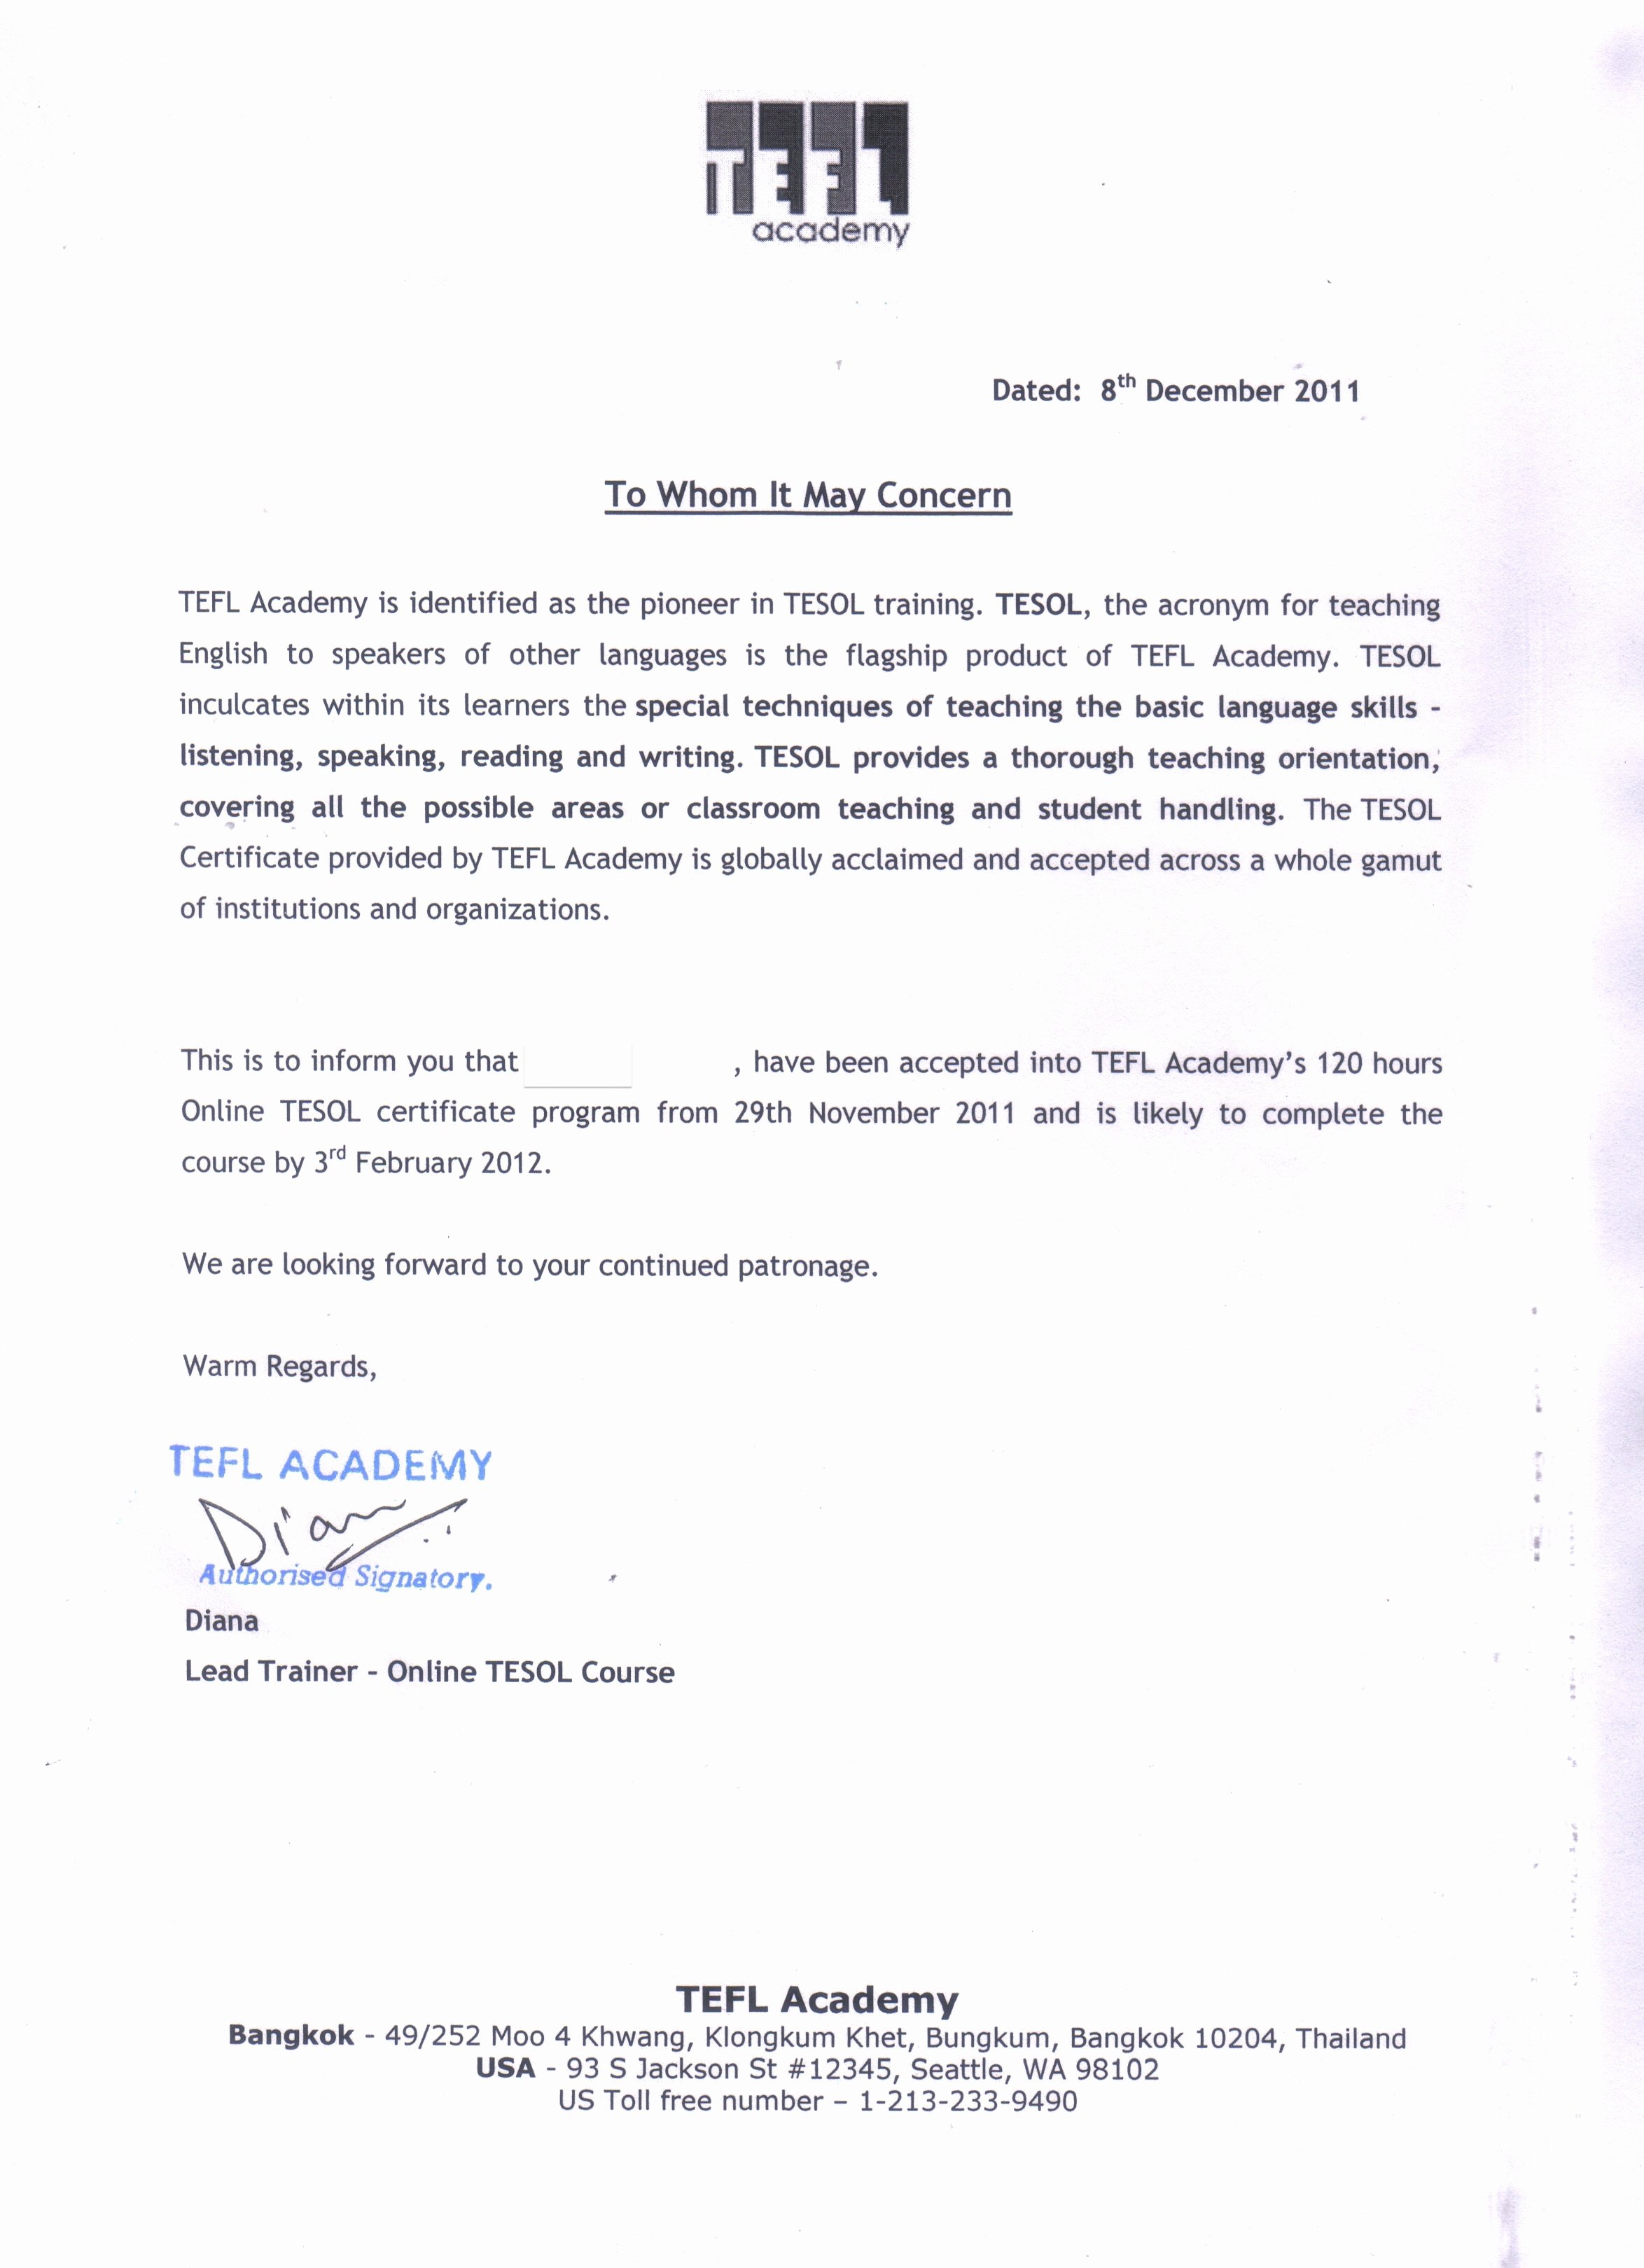 Epik Letter Of Recommendation Best Of Writing A Letter Of Re Mendation Verification Of Deposit